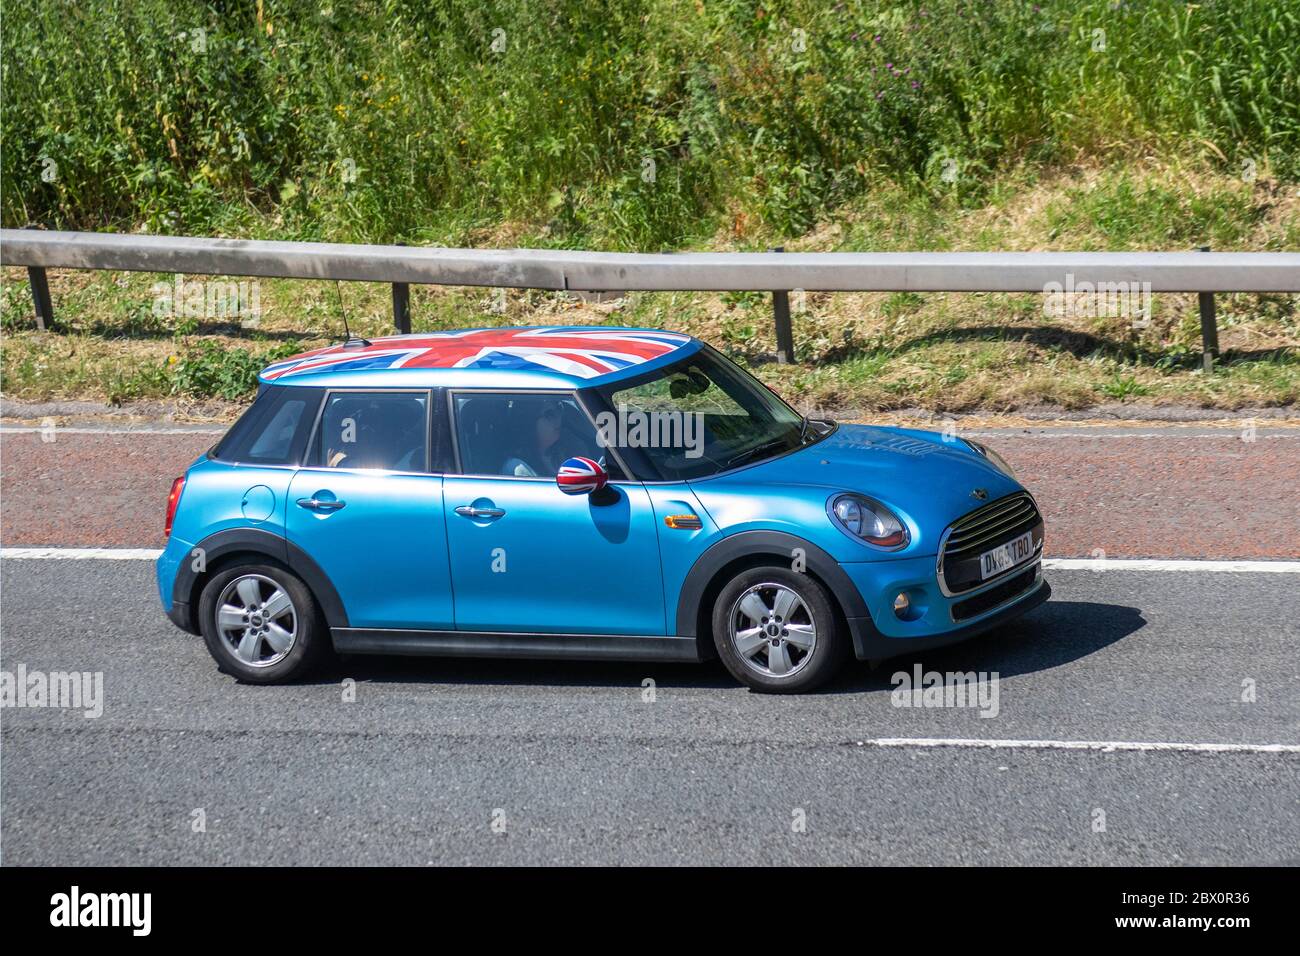 A Red Mini Cooper wth a Union Jack Roof by John Cooper version of the mini  parked on a cobbled street in Huddersfield Stock Photo - Alamy